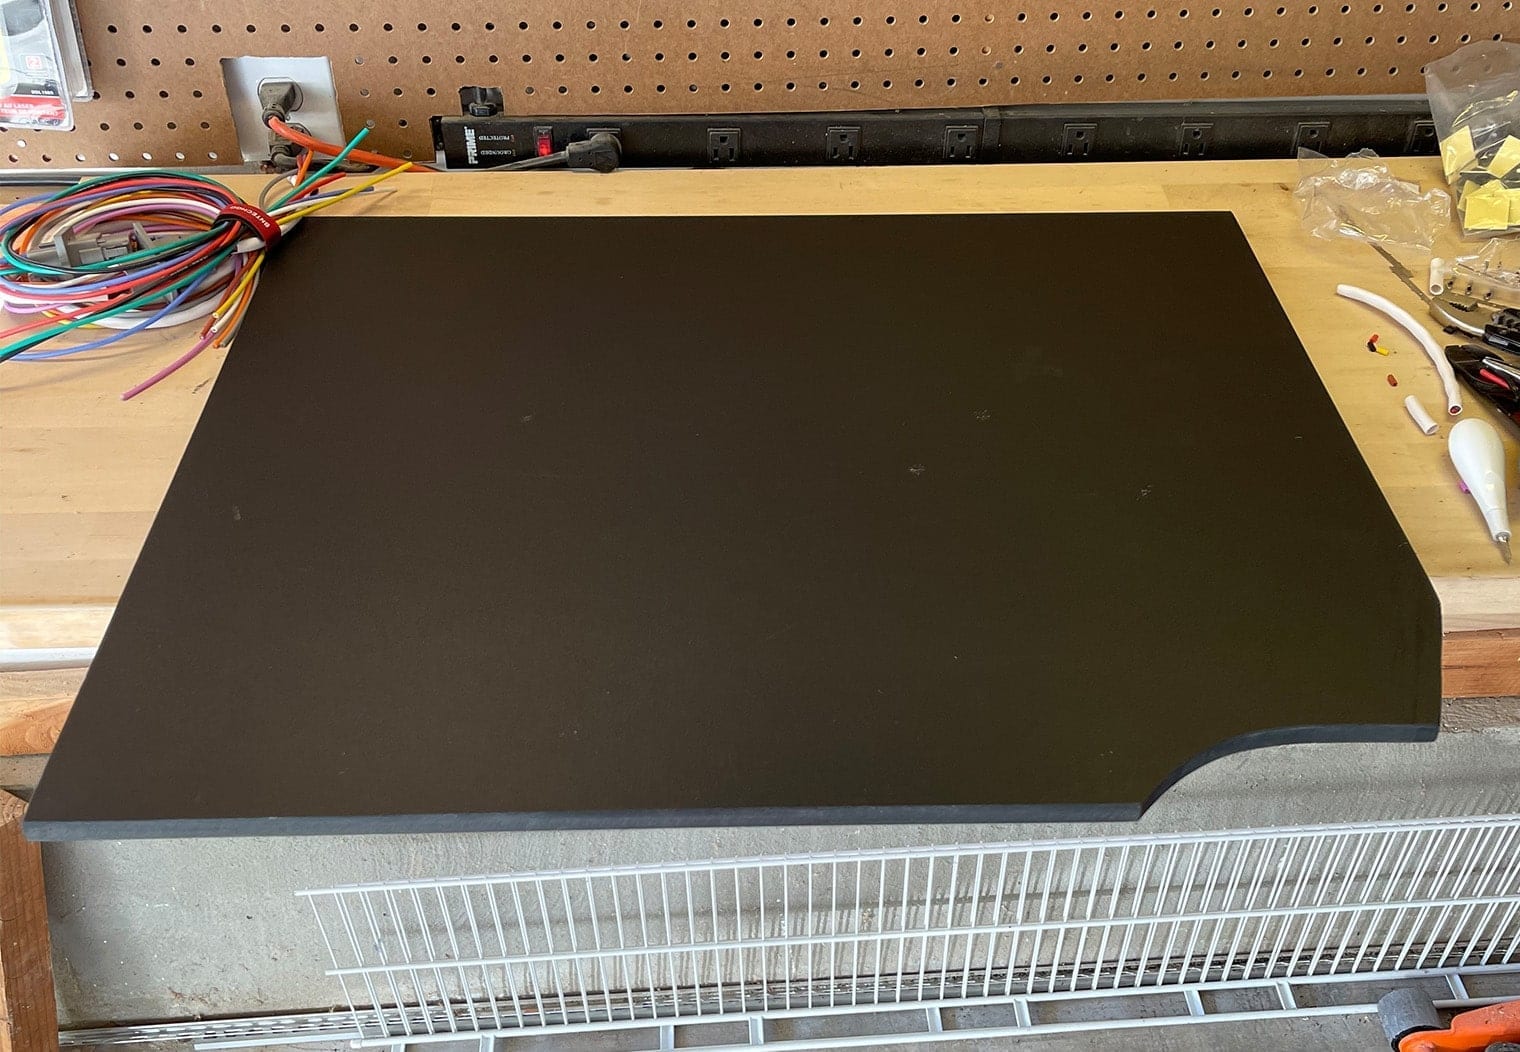 axis a22 amplifier rack starboard cut out from template